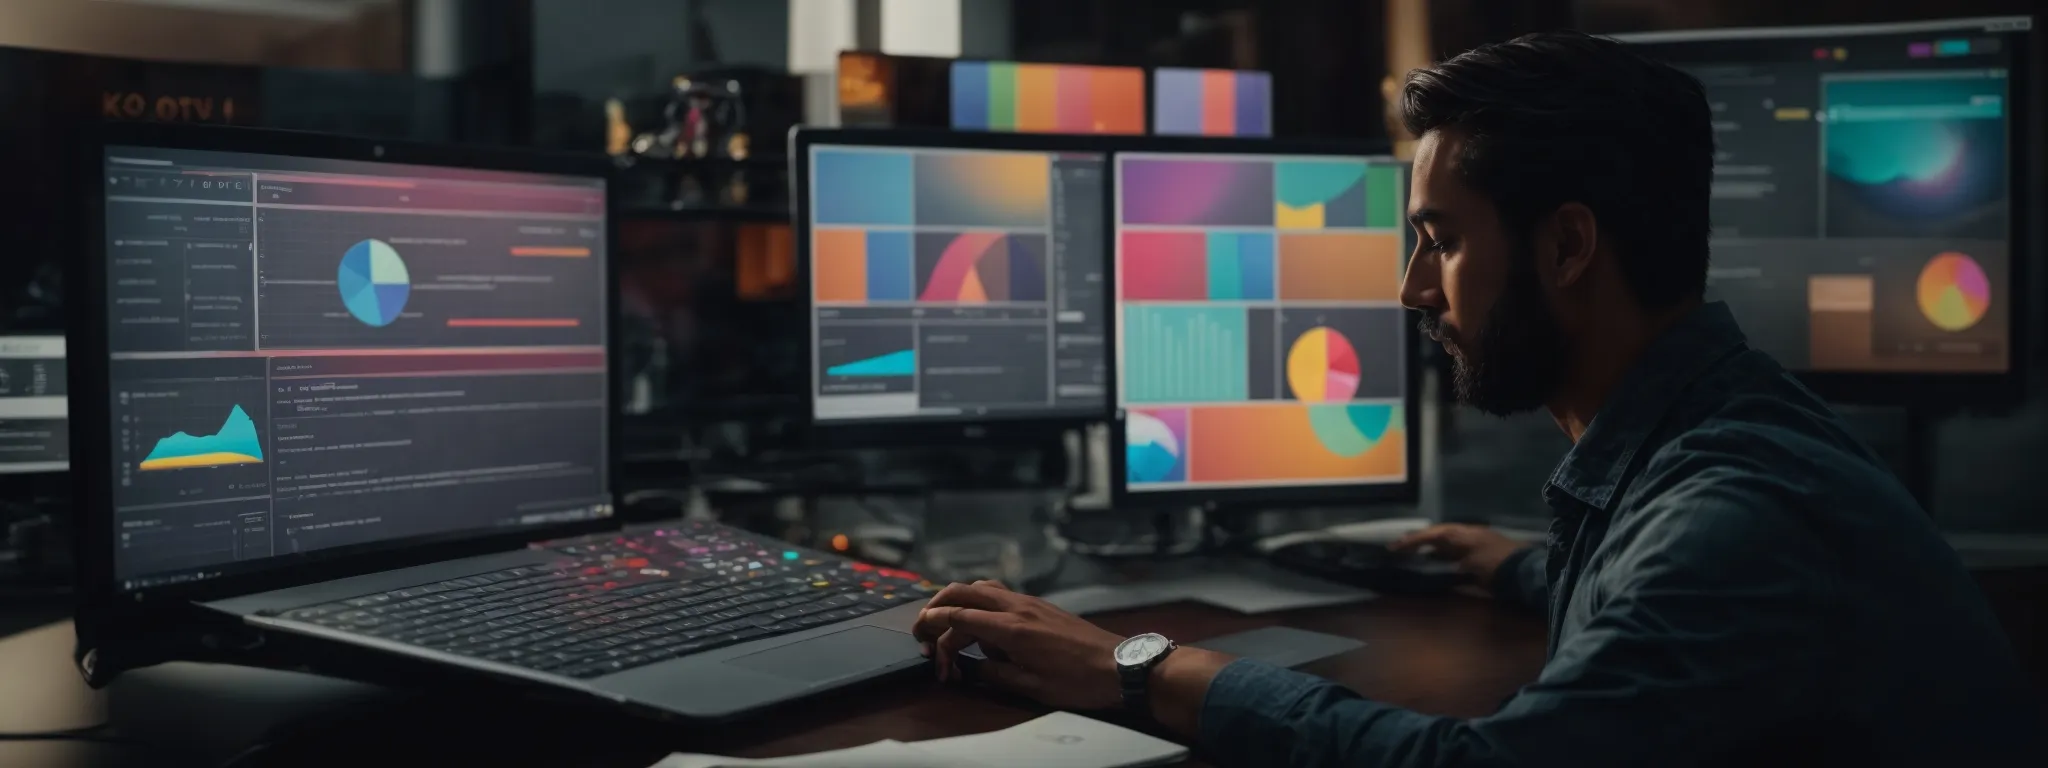 a marketer analyzes colorful pie charts and trend graphs on a computer screen, reflecting diverse keyword research strategies.